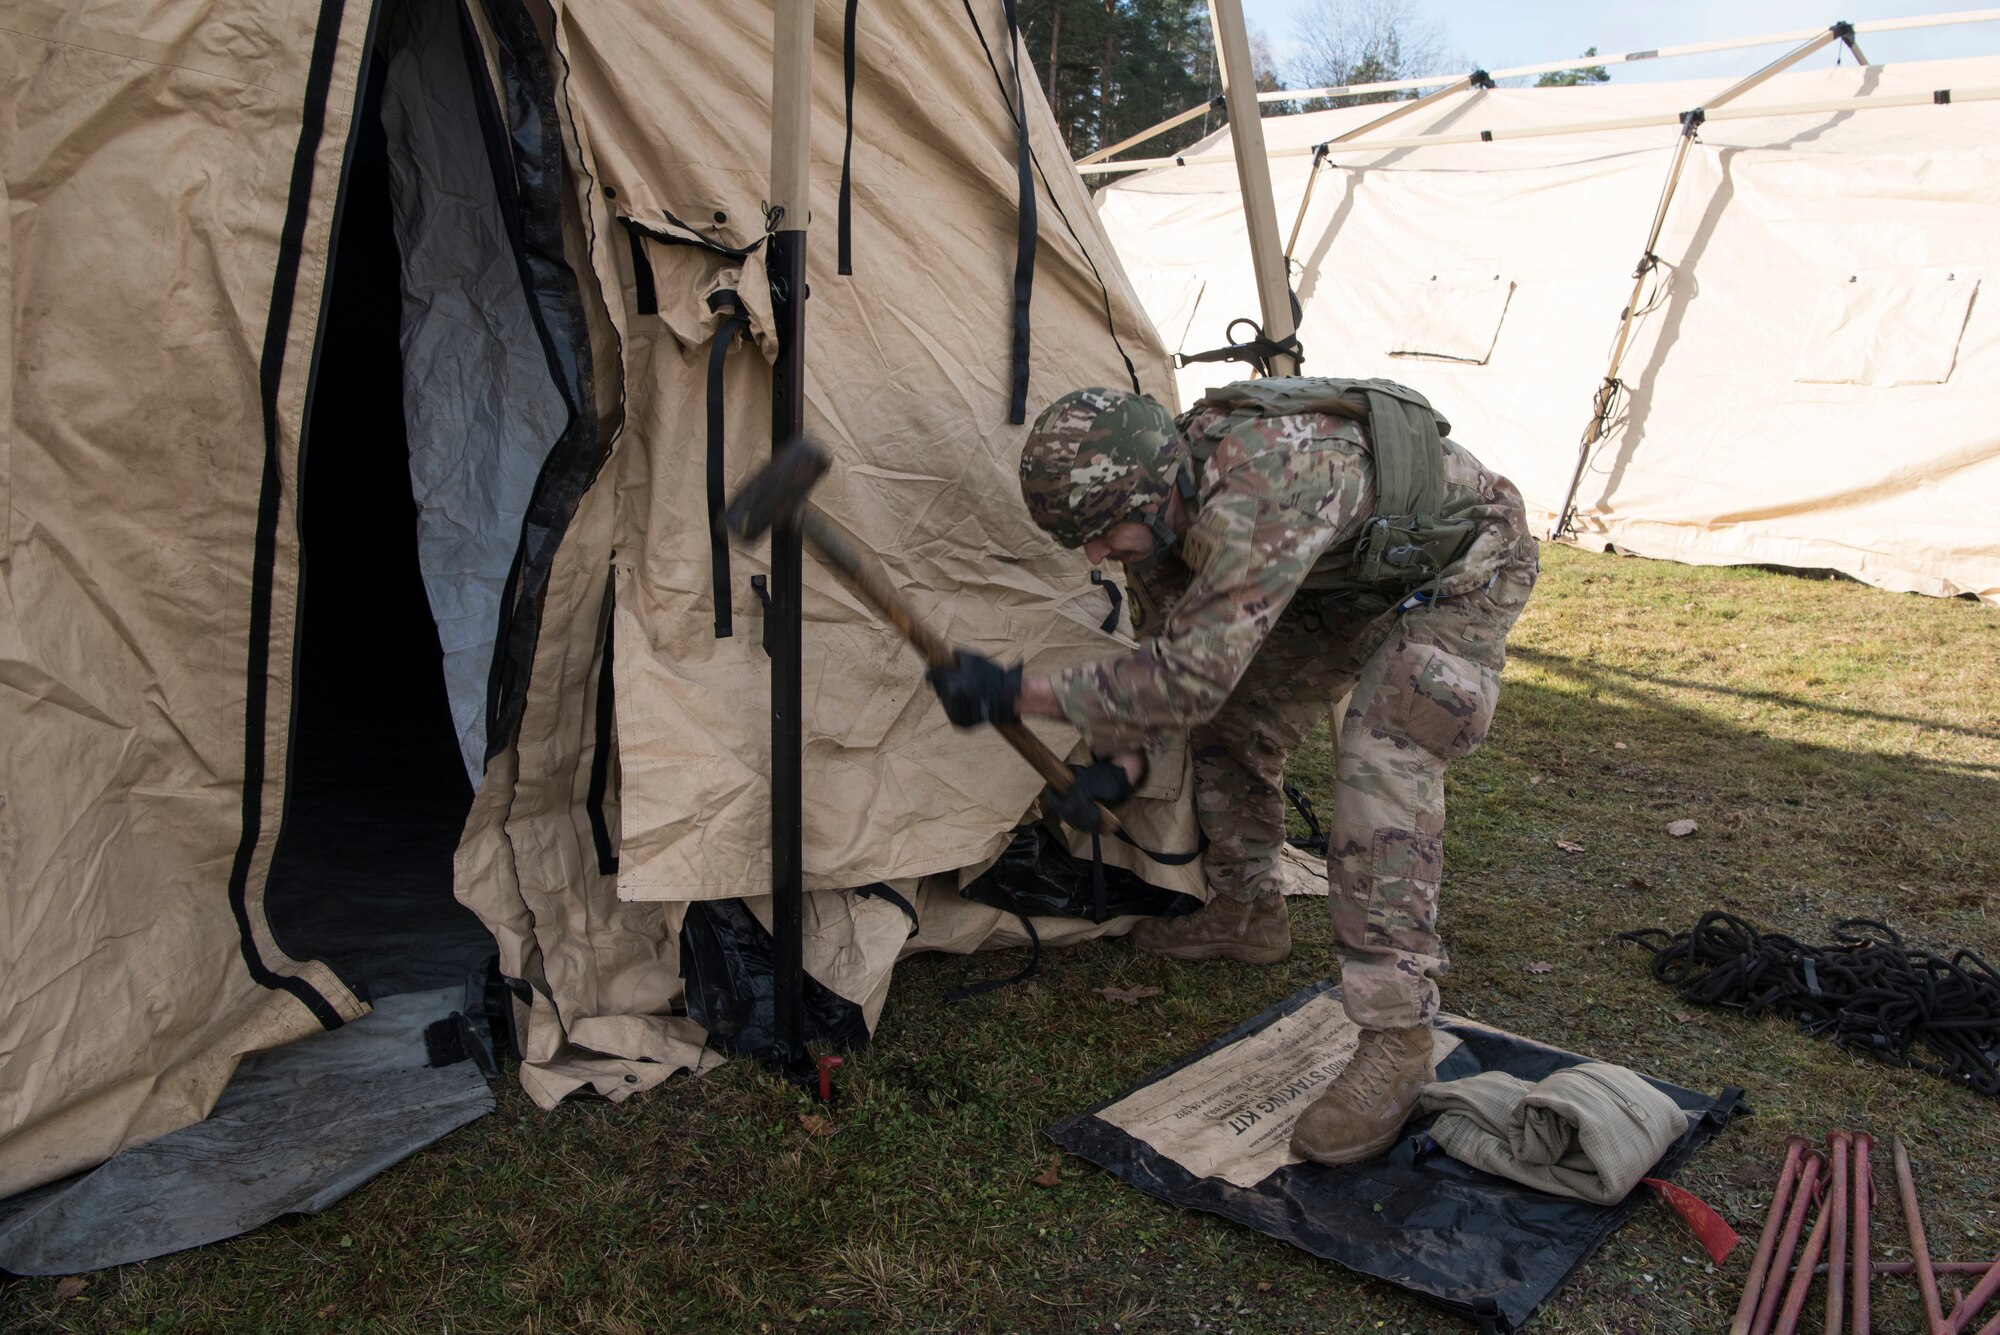 U.S. Air Force Staff Sgt. Anthony Palmer, 435th Construction and Training Squadron heavy equipment and pavements operator, drives a stake into the ground to secure an expeditionary tent during exercise Agile Wolf 21-01